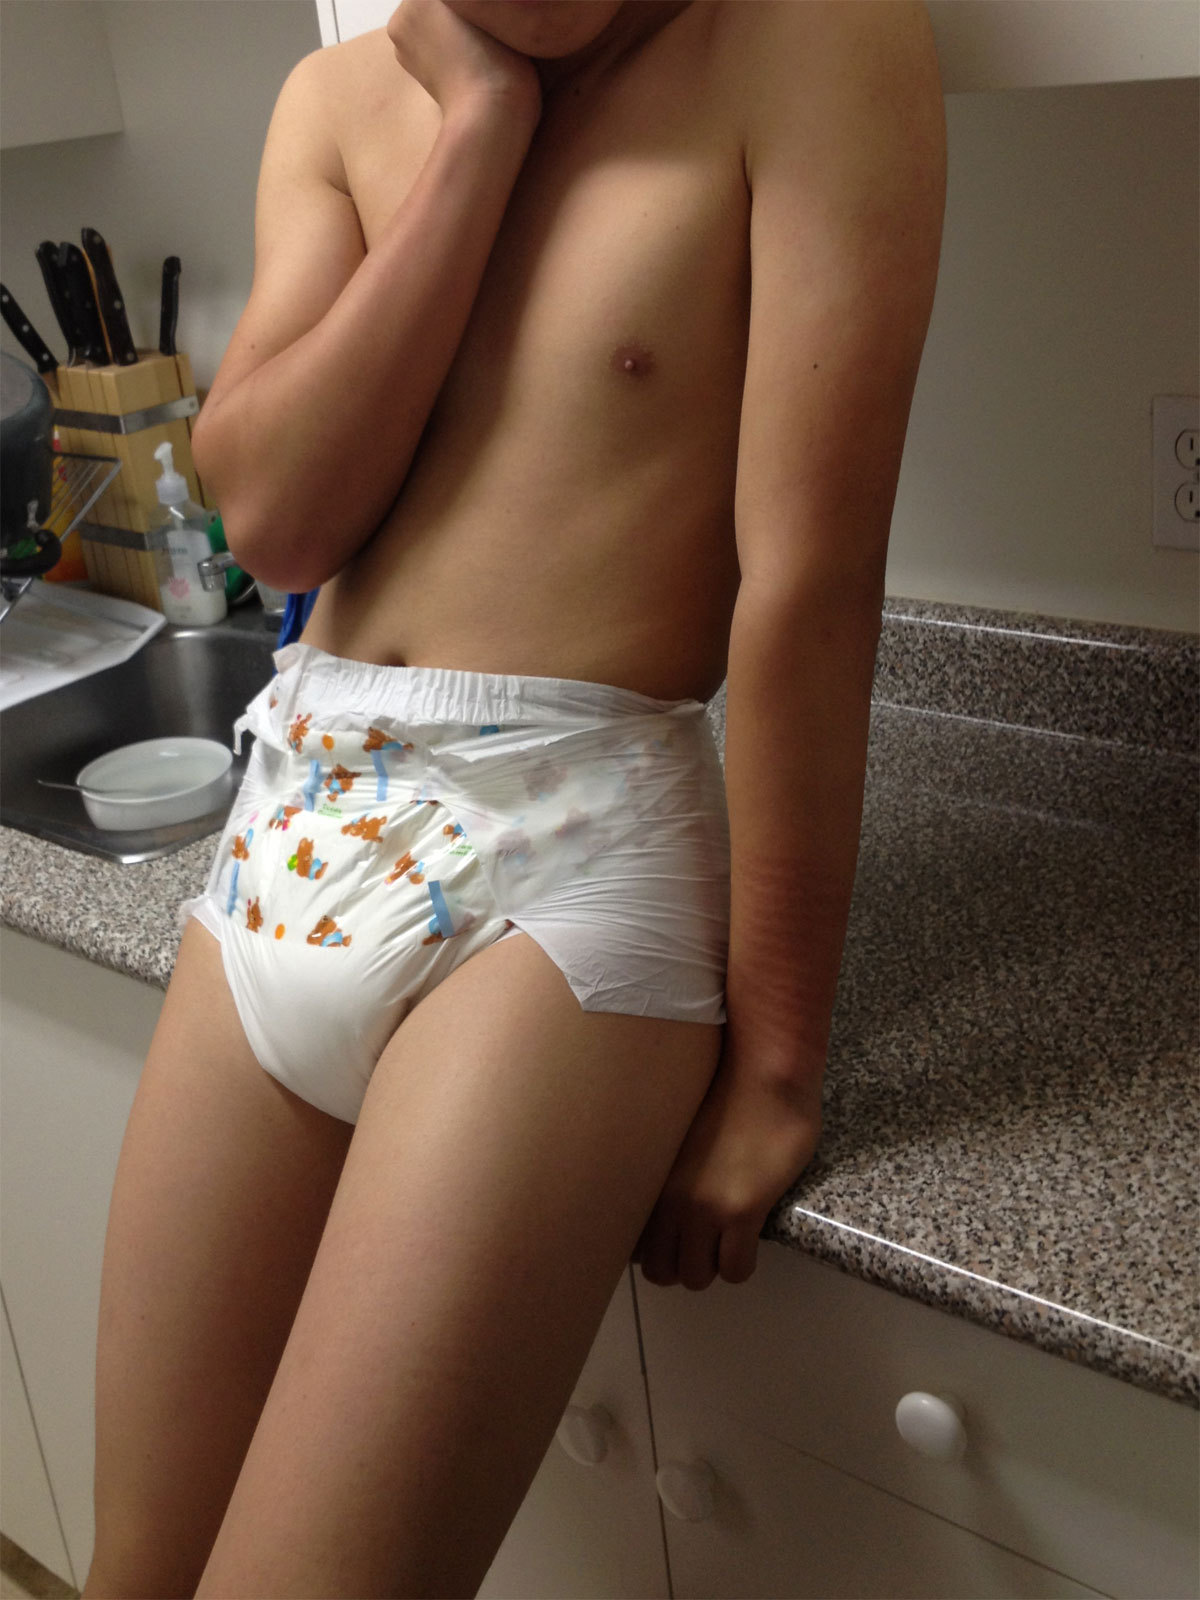 Boys forced to wear diapers